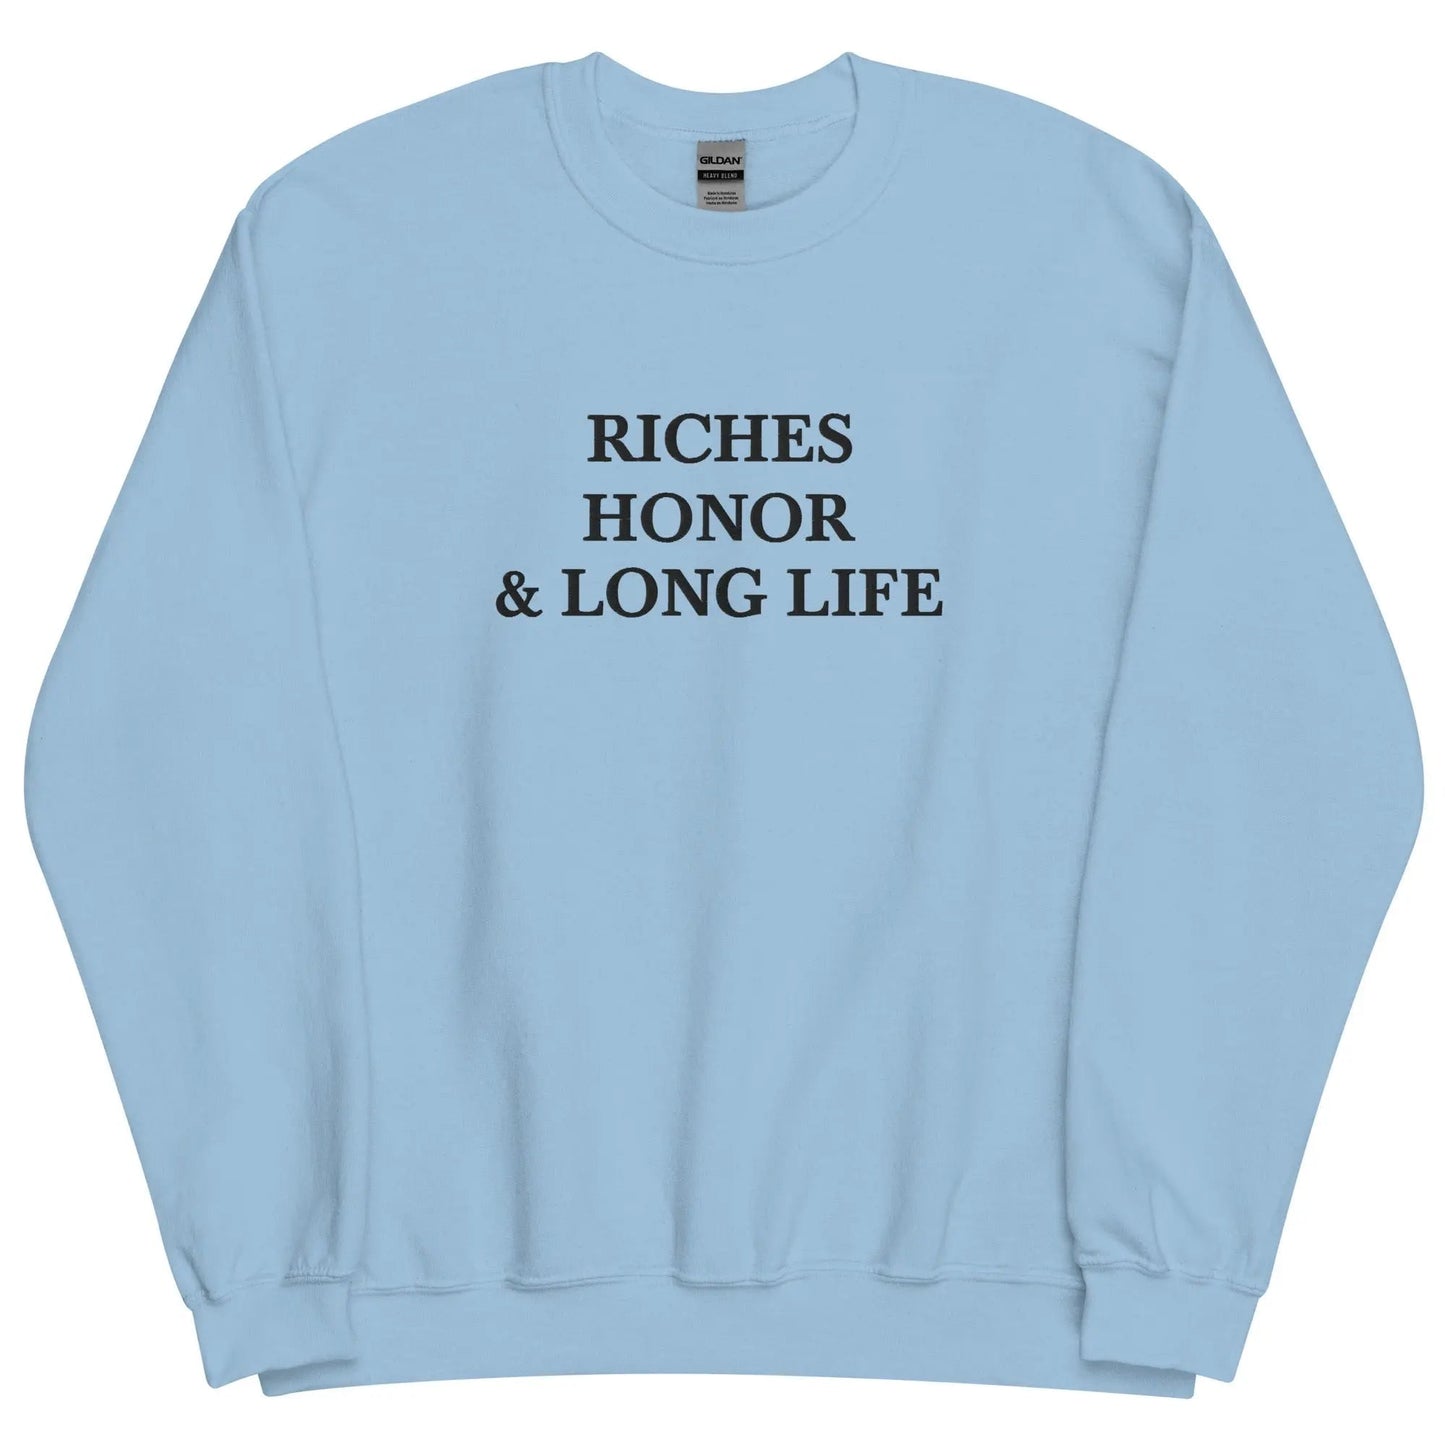 Embroidered Riches Honor & Long Life Crewneck Sweatshirt-clothes- sweater-Light Blue-S-mysticalcherry